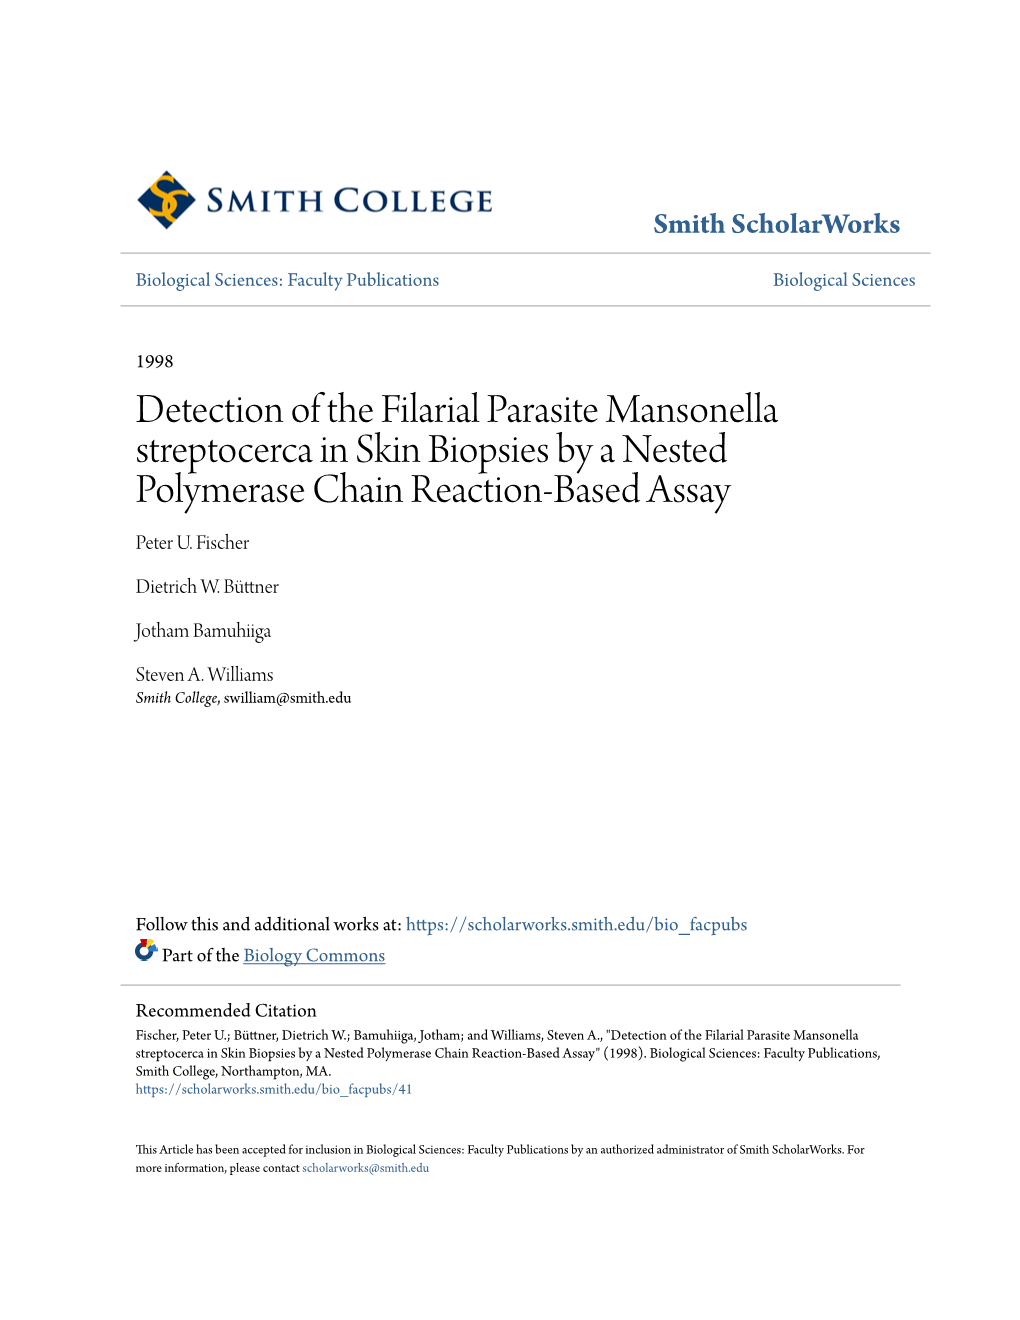 Detection of the Filarial Parasite Mansonella Streptocerca in Skin Biopsies by a Nested Polymerase Chain Reaction-Based Assay Peter U